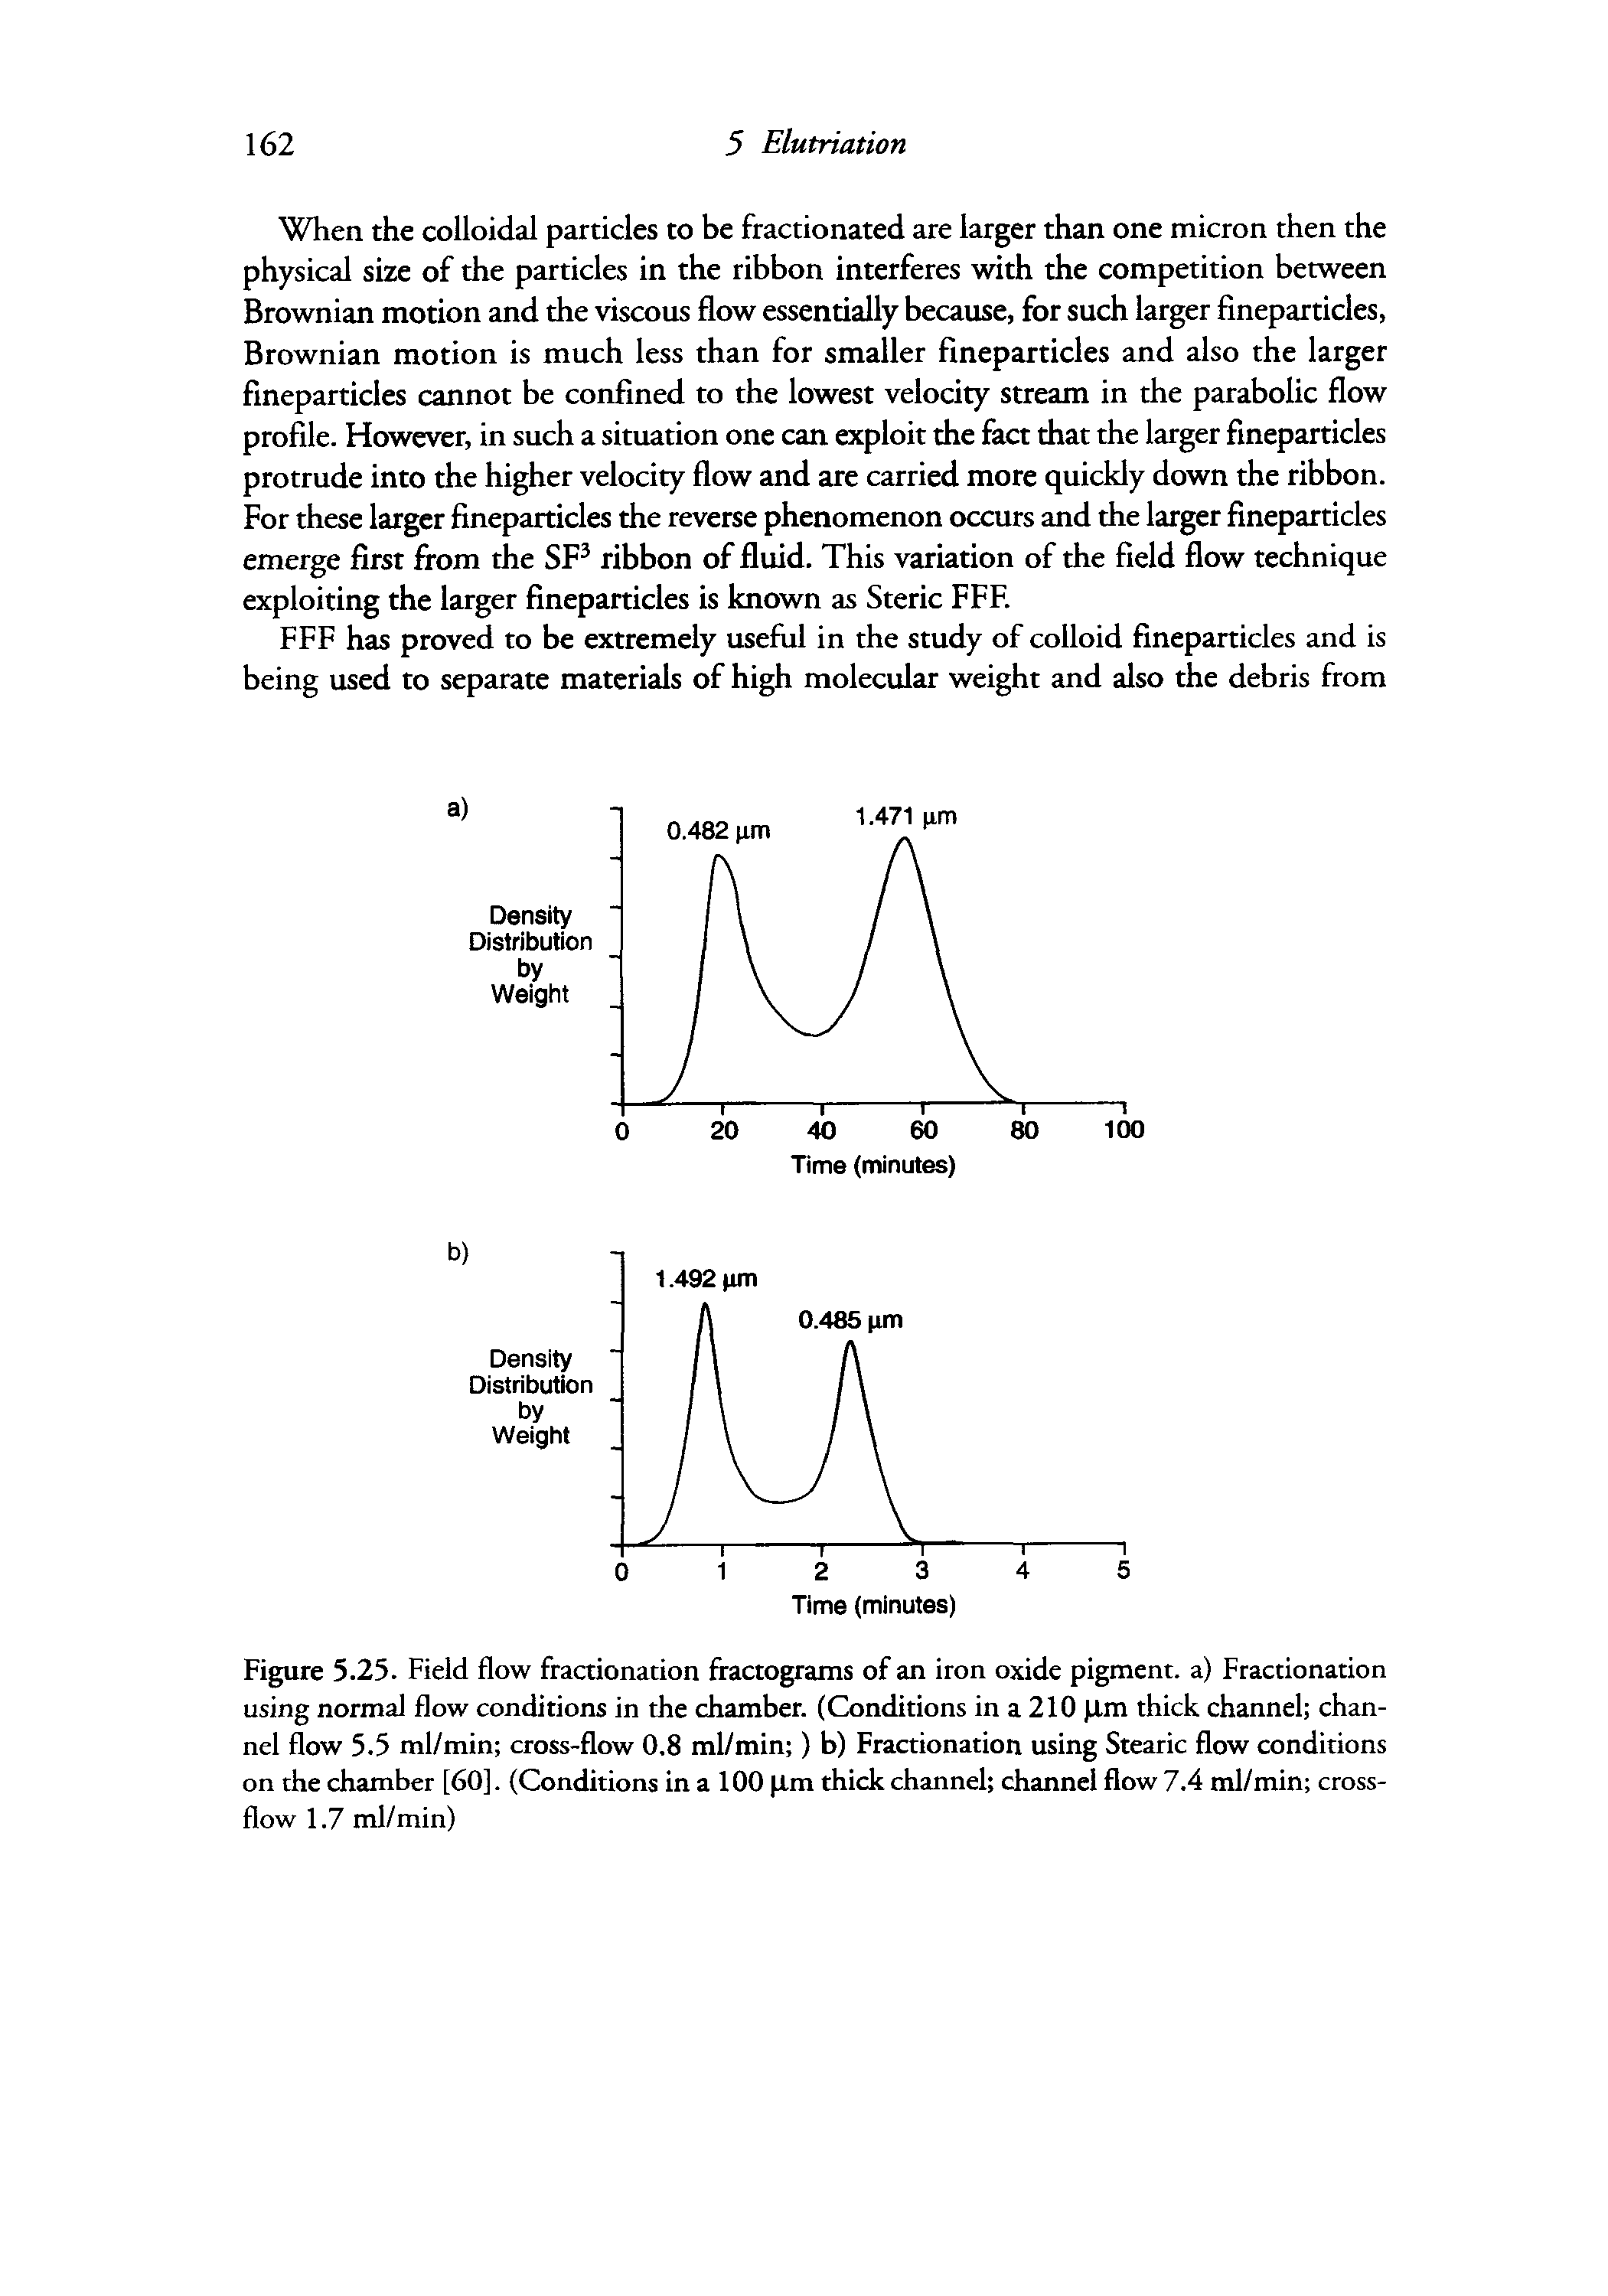 Figure 5.25. Field flow fractionation flactogiams of an iron oxide pigment, a) Fractionation using normal flow conditions in the chamber. (Conditions in a 210 pm thick channel channel flow 5.5 ml/min cross-flow 0.8 ml/min ) b) Fractionation usii Stearic flow conditions on the chamber [60]. (Conditions in a 100 pm thick channel channel flow 7.4 ml/min cross-flow 1.7 ml/min)...